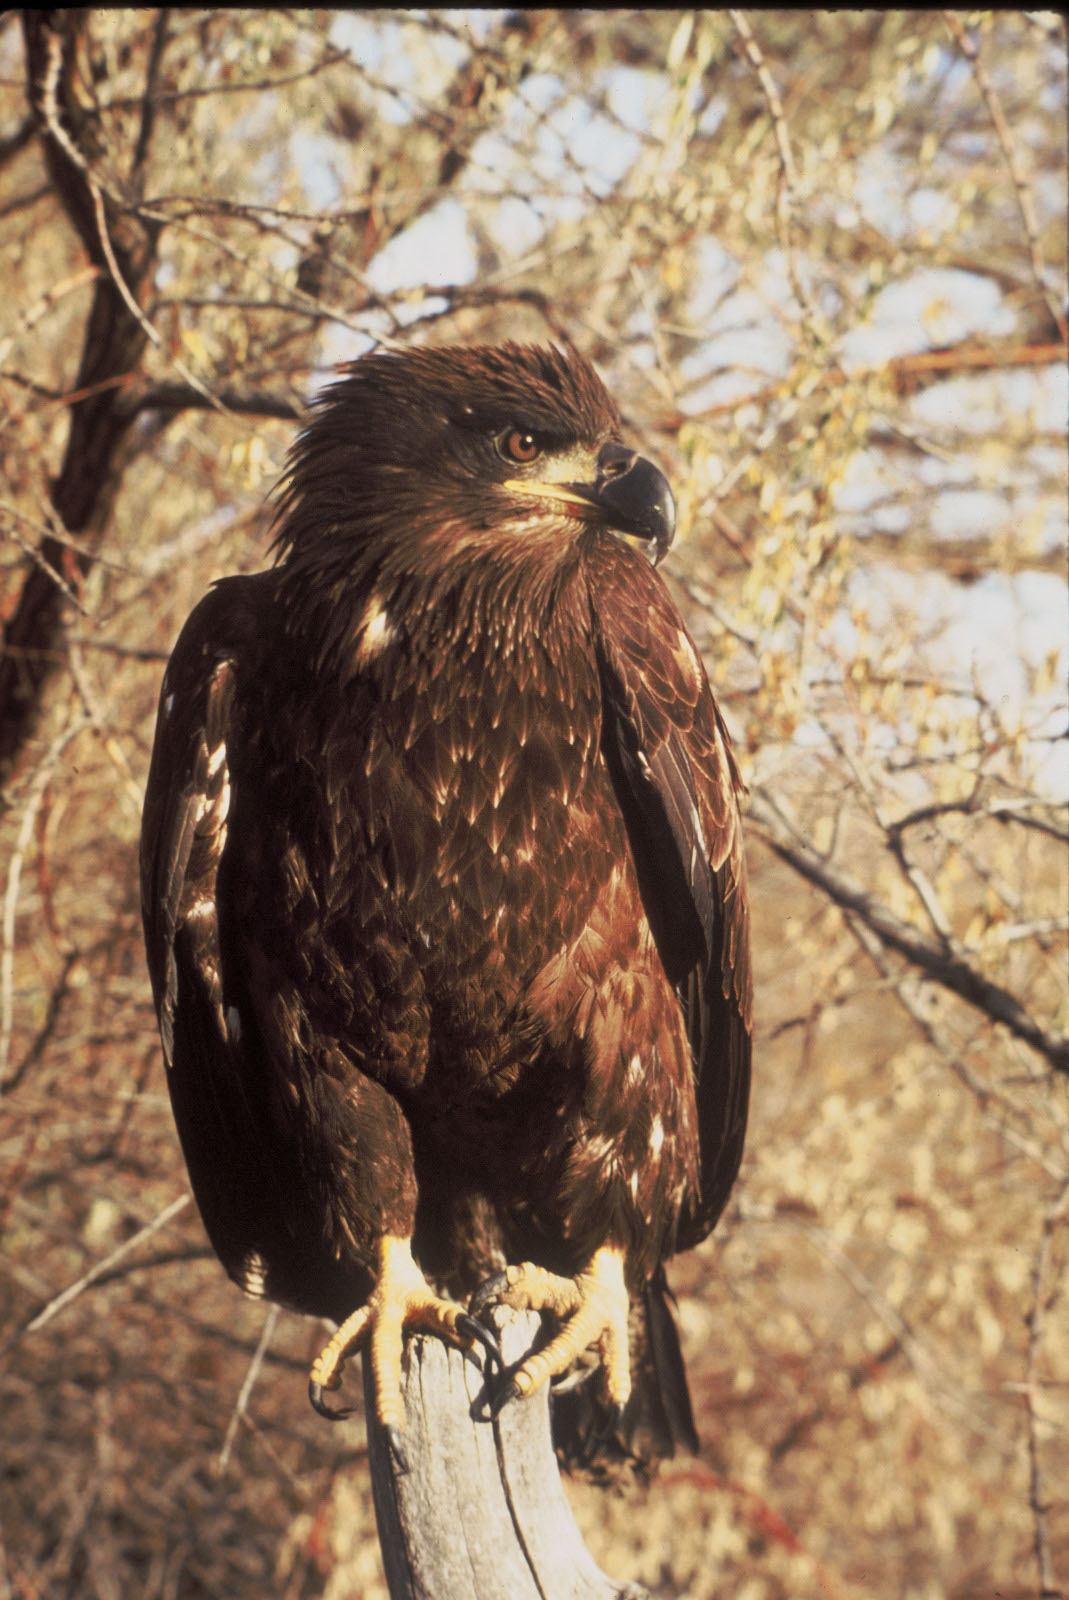 Immature bald eagle - National Archives Identifier: 166700670